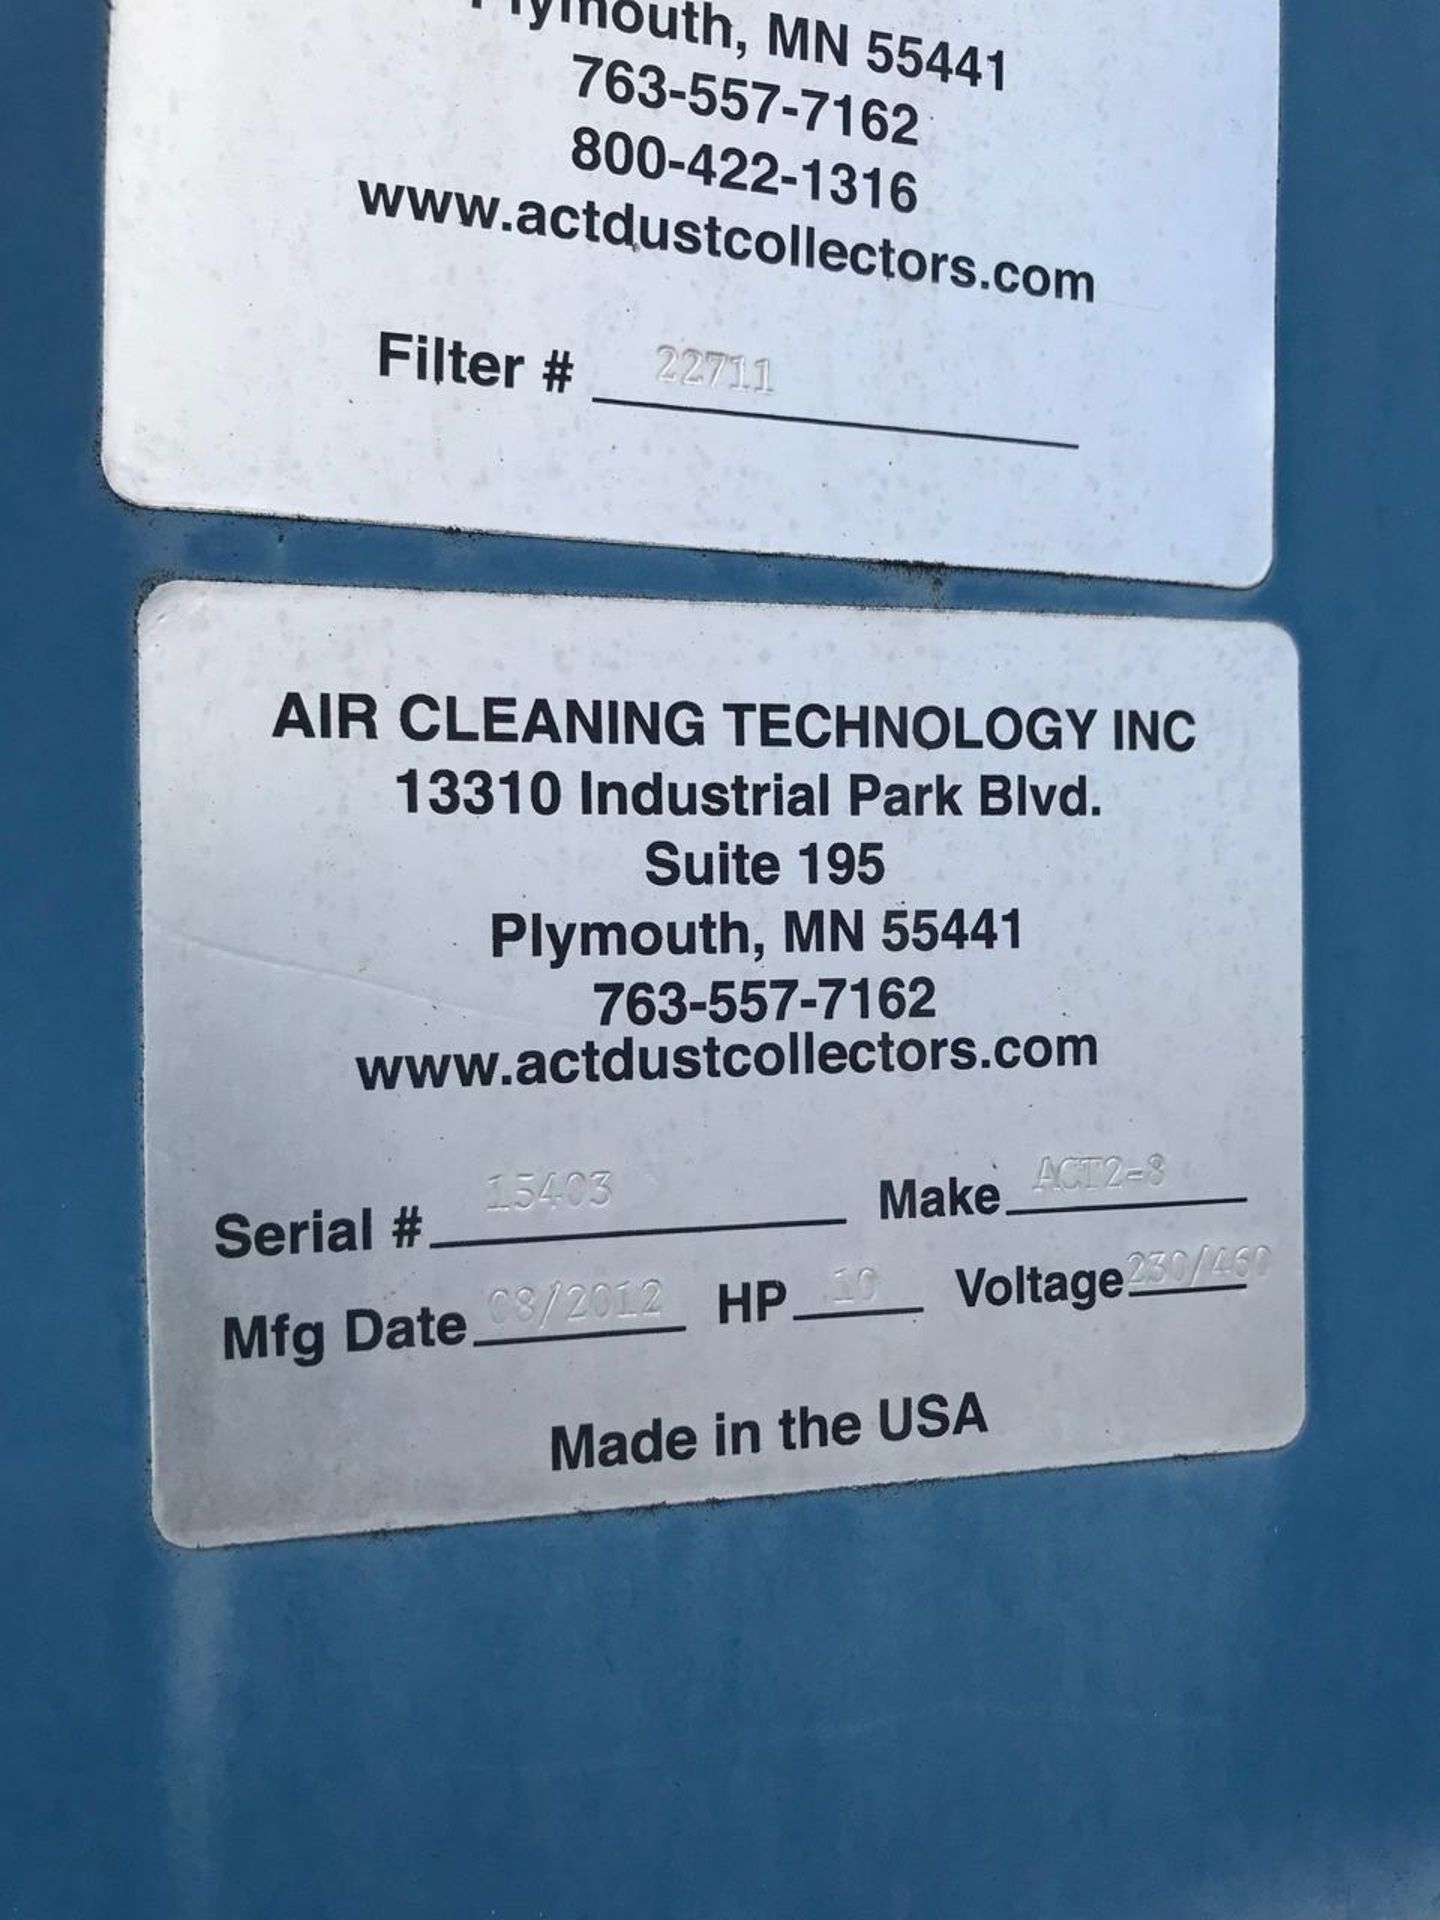 2012 American Cleaning Technology ACT 2-8 Dust Collector - Image 3 of 9